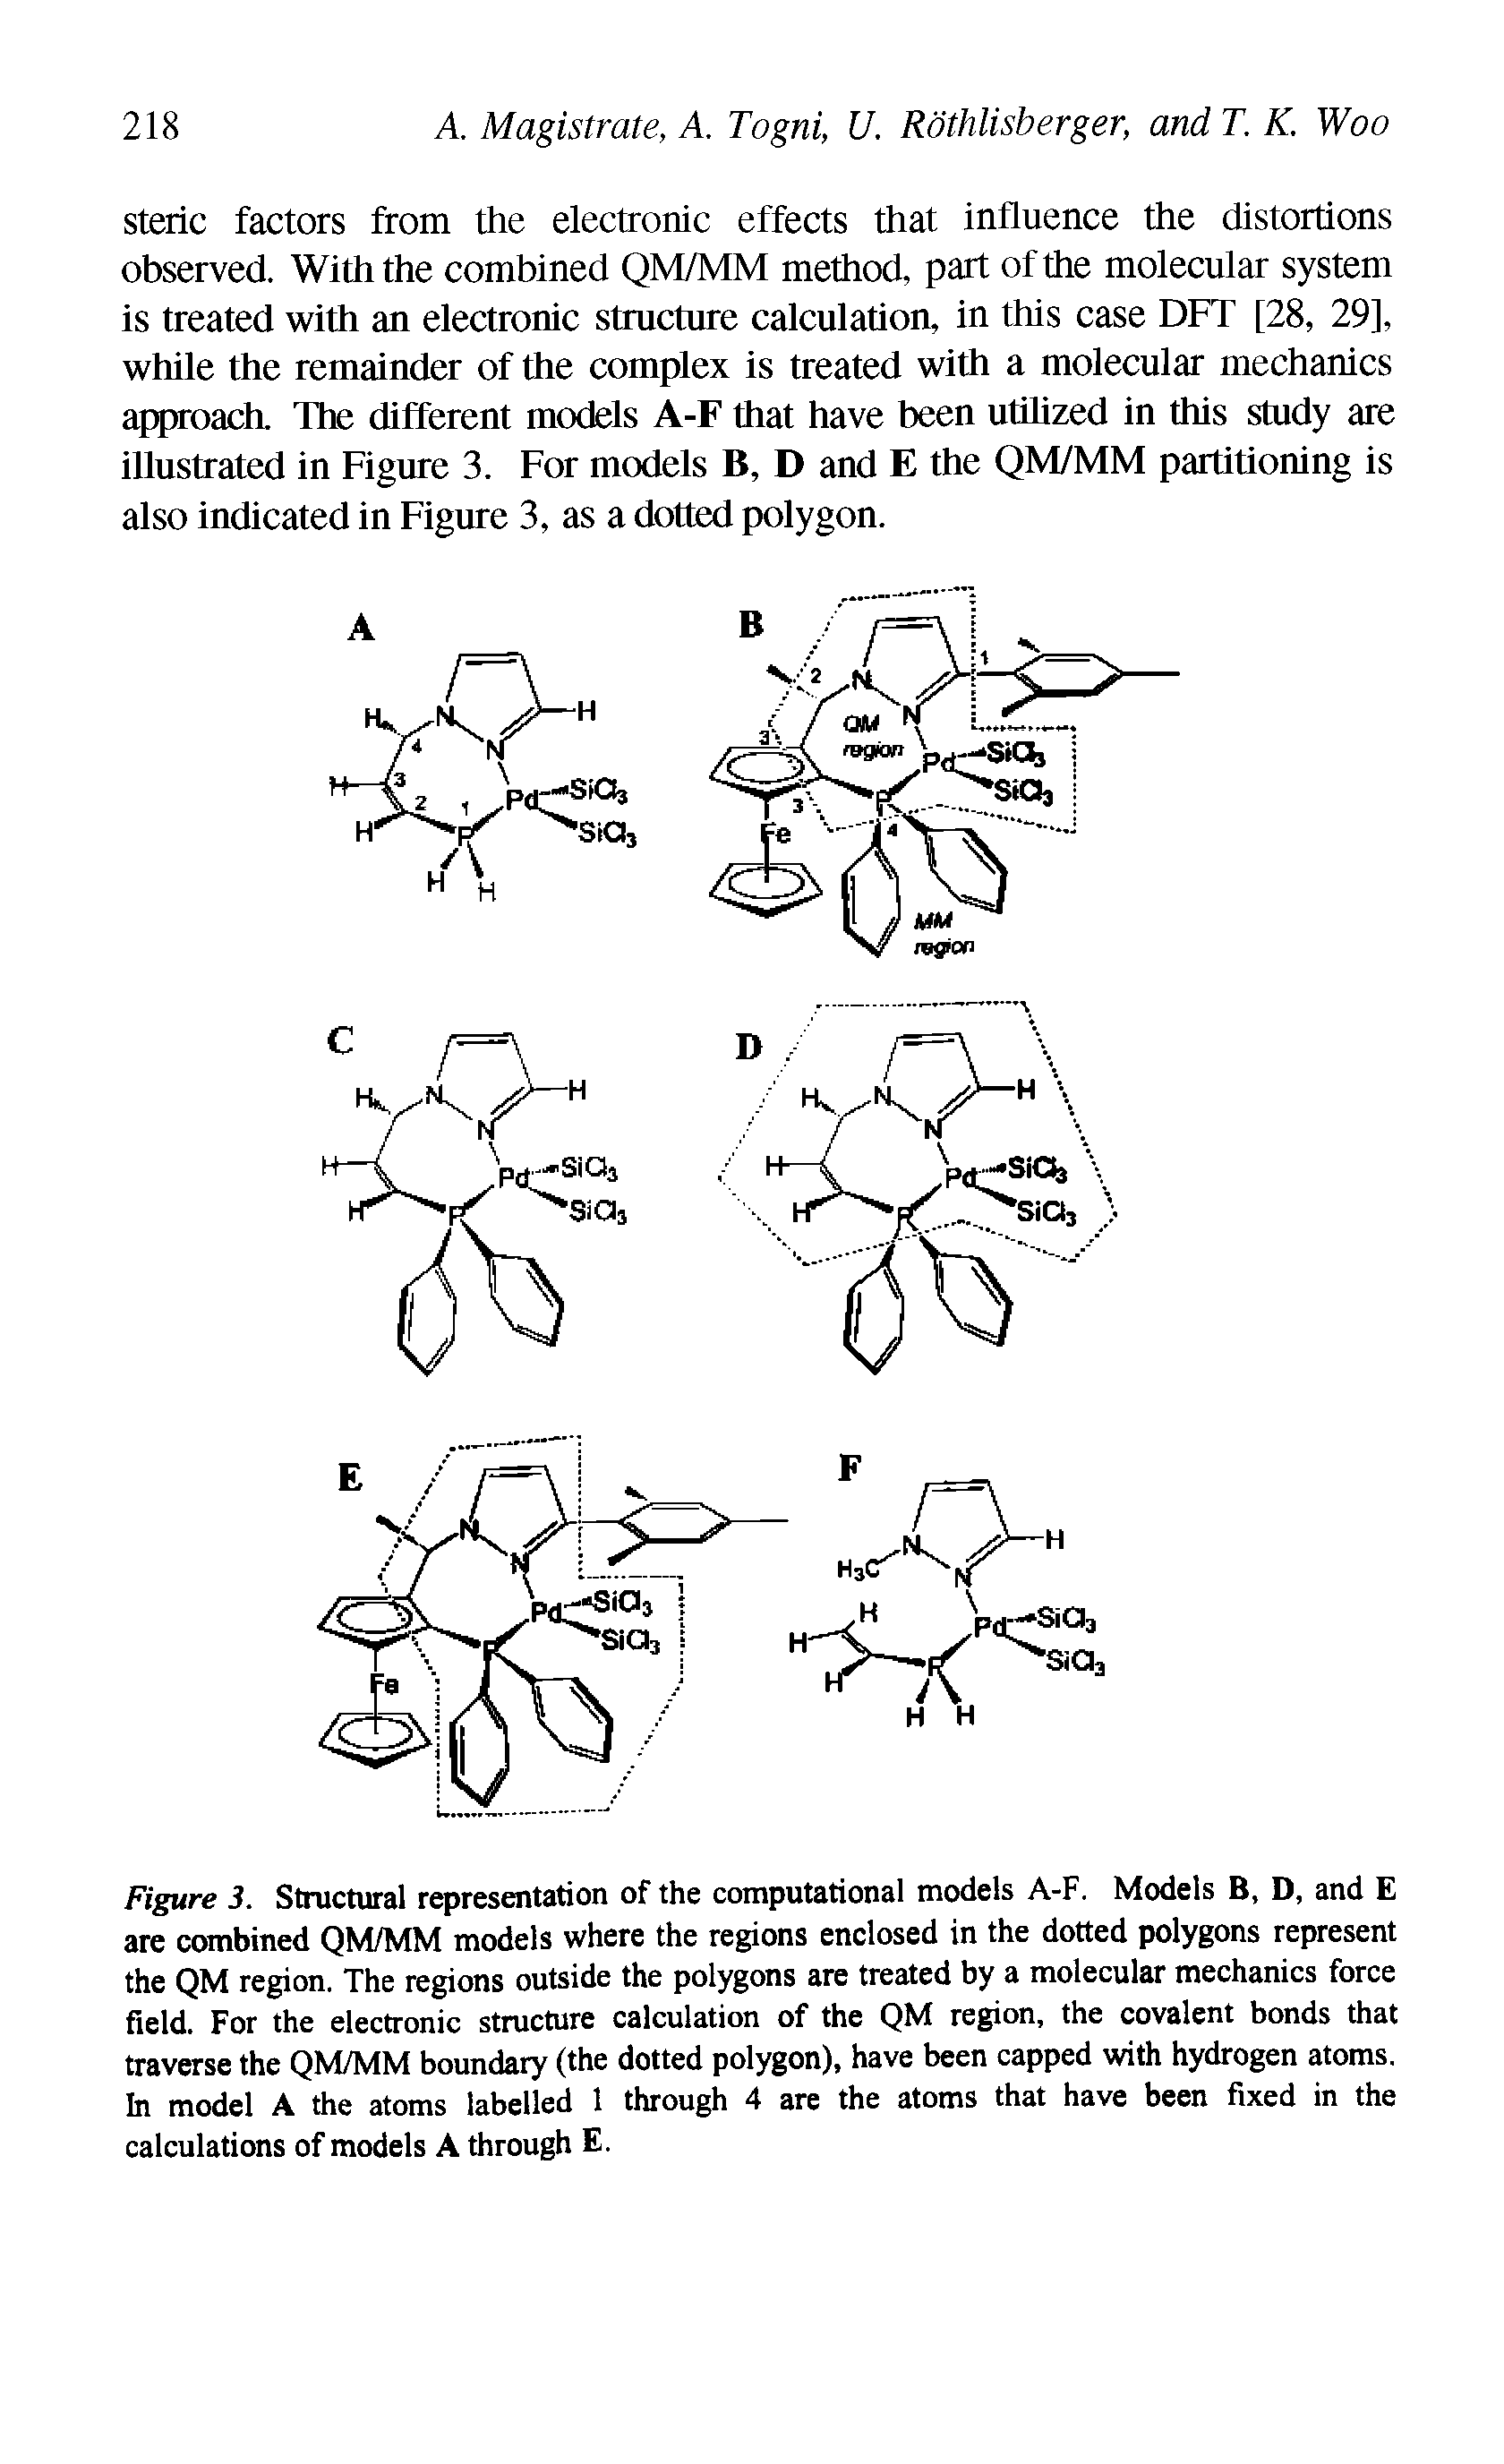 Figure 3. Structural representation of the computational models A-F. Models B, D, and E are combined QM/MM models where the regions enclosed in the dotted polygons represent the QM region. The regions outside the polygons are treated by a molecular mechanics force field. For the electronic structure calculation of the QM region, the covalent bonds that traverse the QM/MM boundary (the dotted polygon), have been capped with hydrogen atoms. In model A the atoms labelled 1 through 4 are the atoms that have been fixed in the calculations of models A through E.